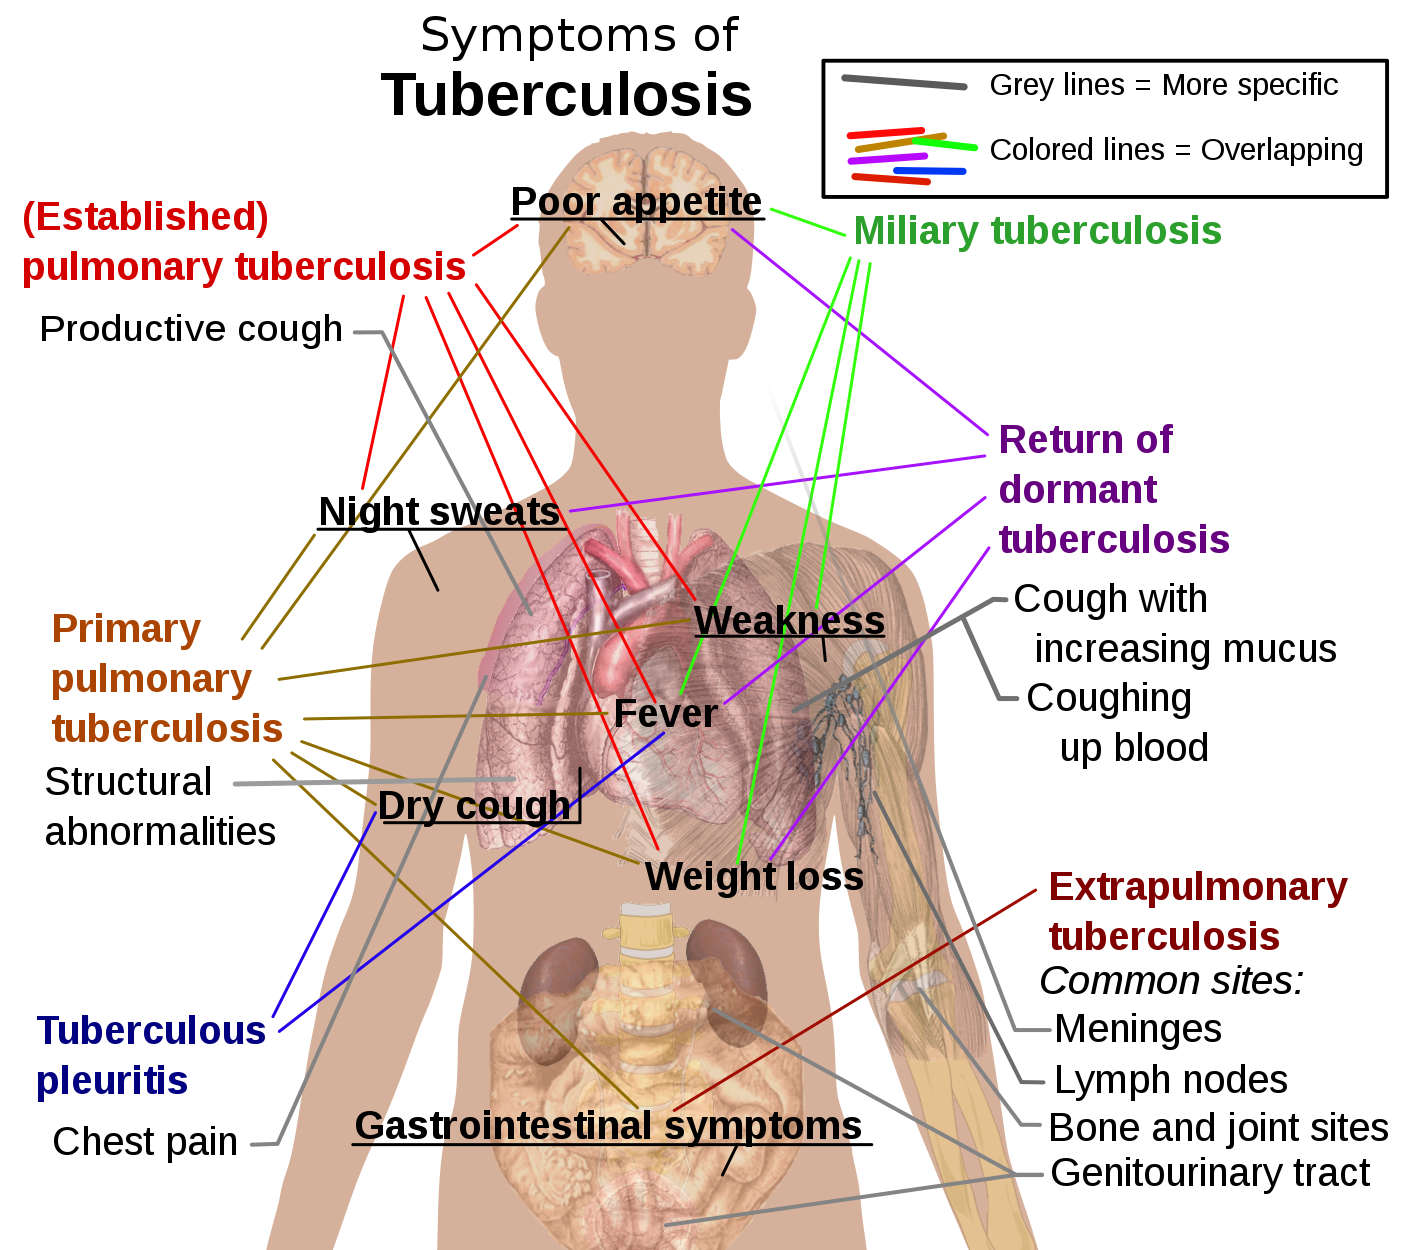 Main symptoms of different variants of tuberculosis.